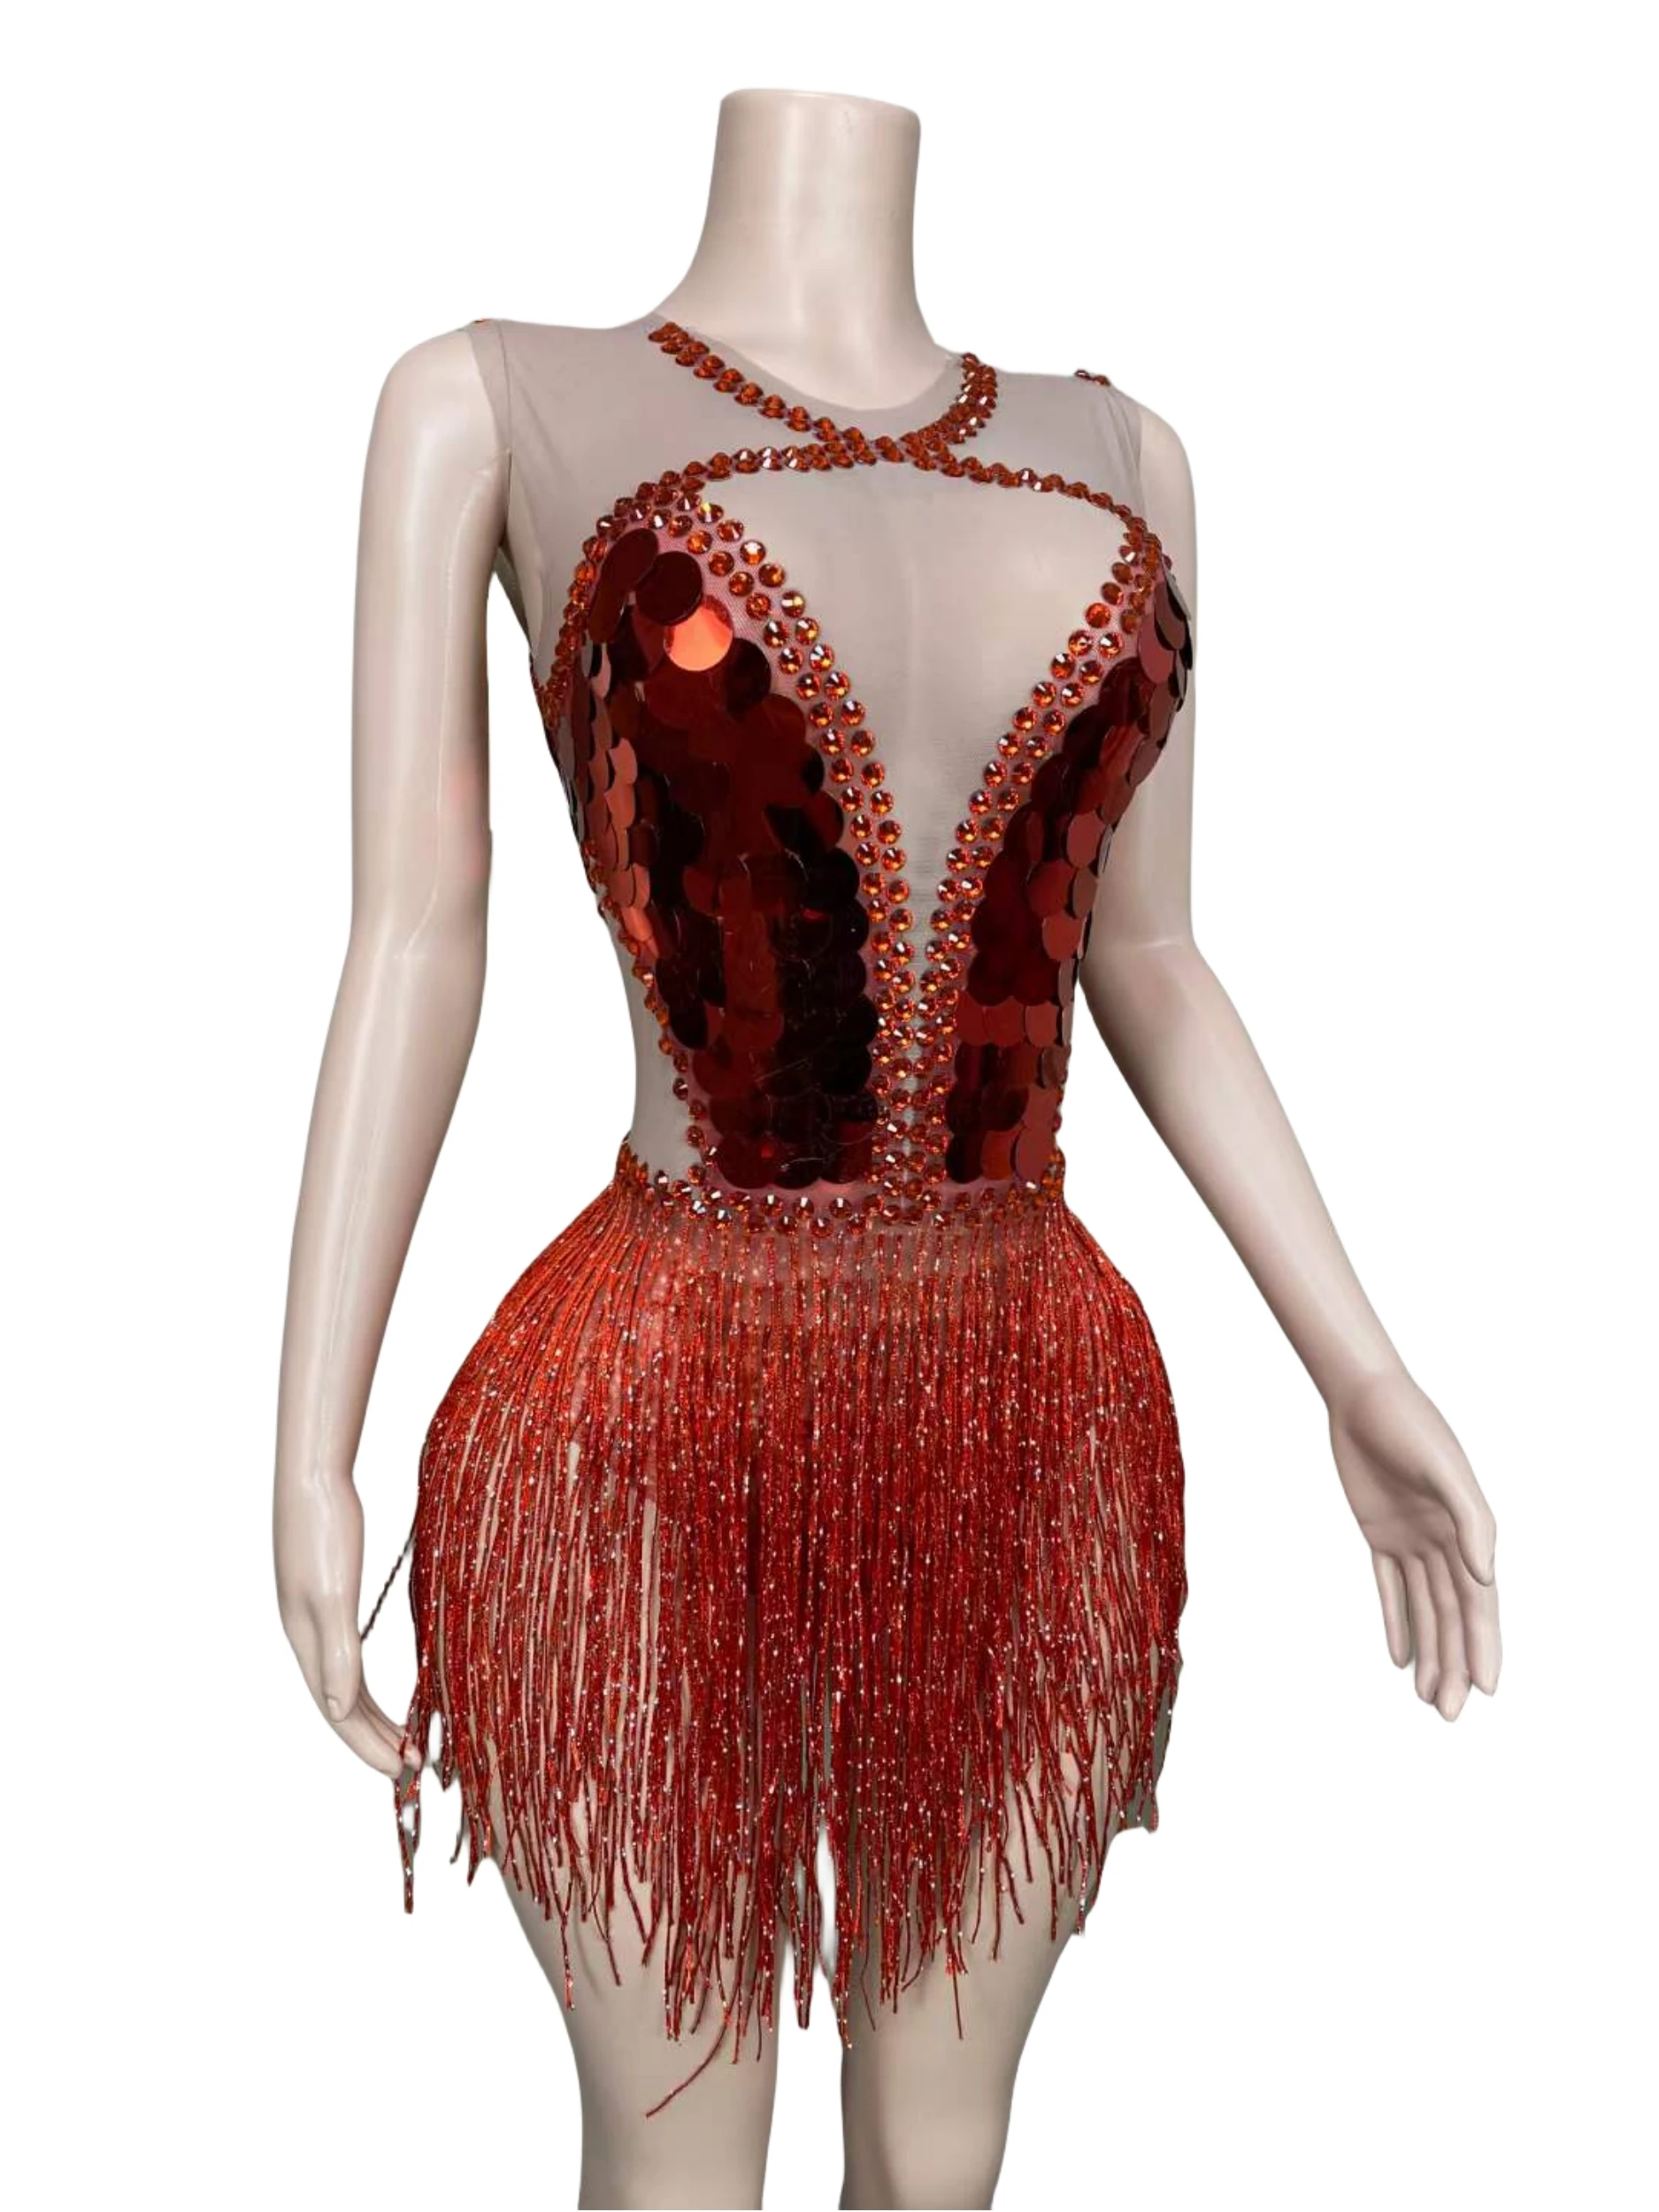 Fringe Sequins Shinning Bodysuits For Women Red Sleeveless Dance Nightclub Stage Wear Drag Queen Outfit Mesh See Thru Costume